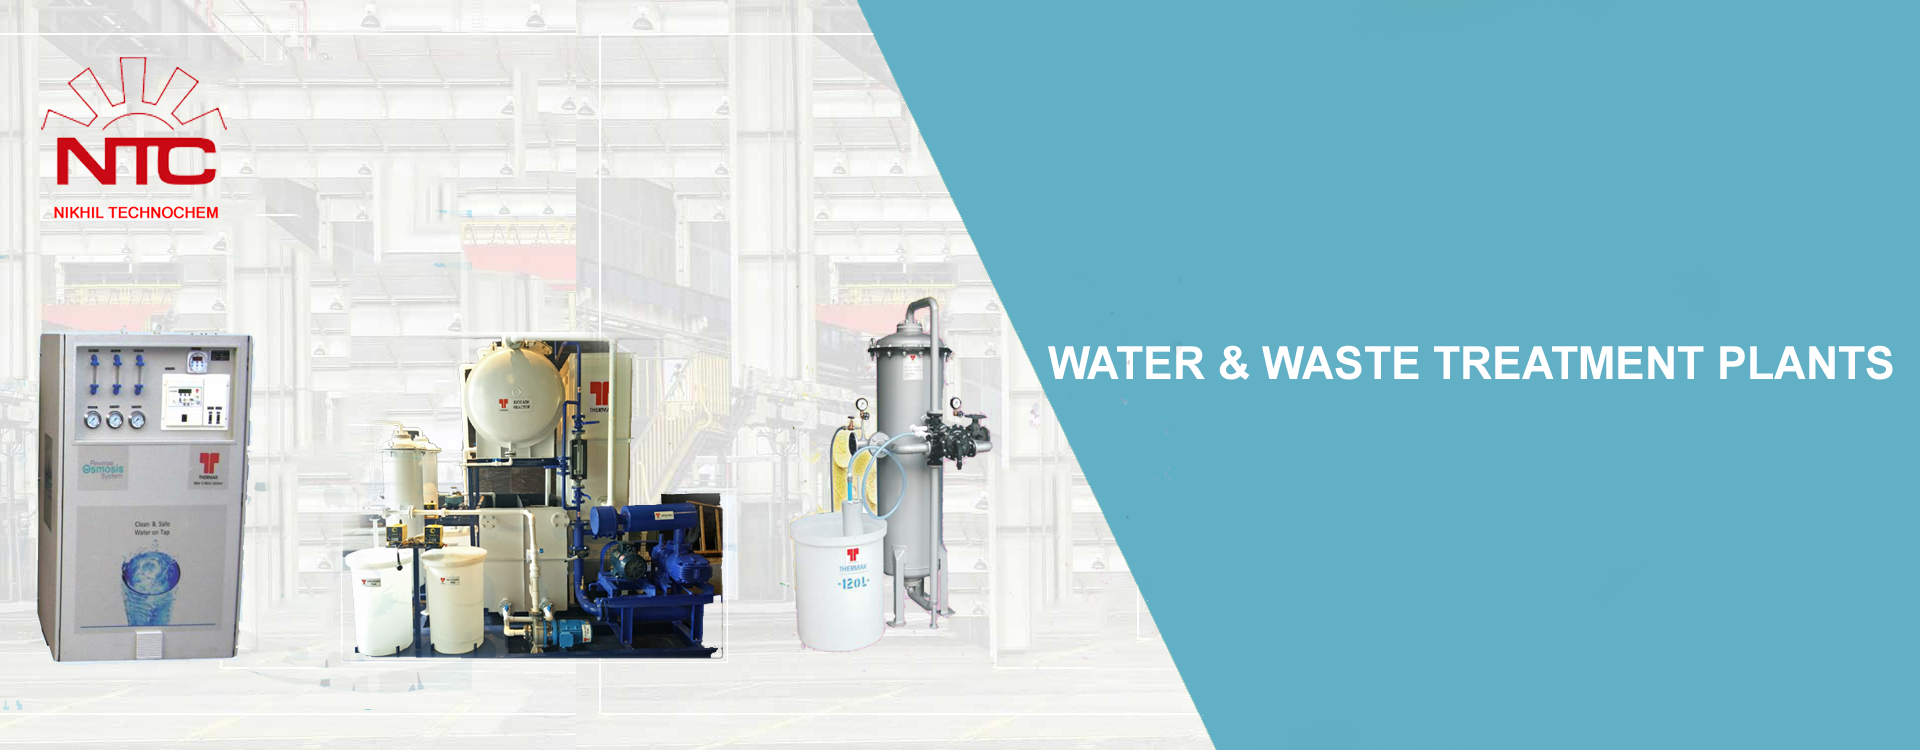 Water and Waste Treatment Plants - NTC Banner Image